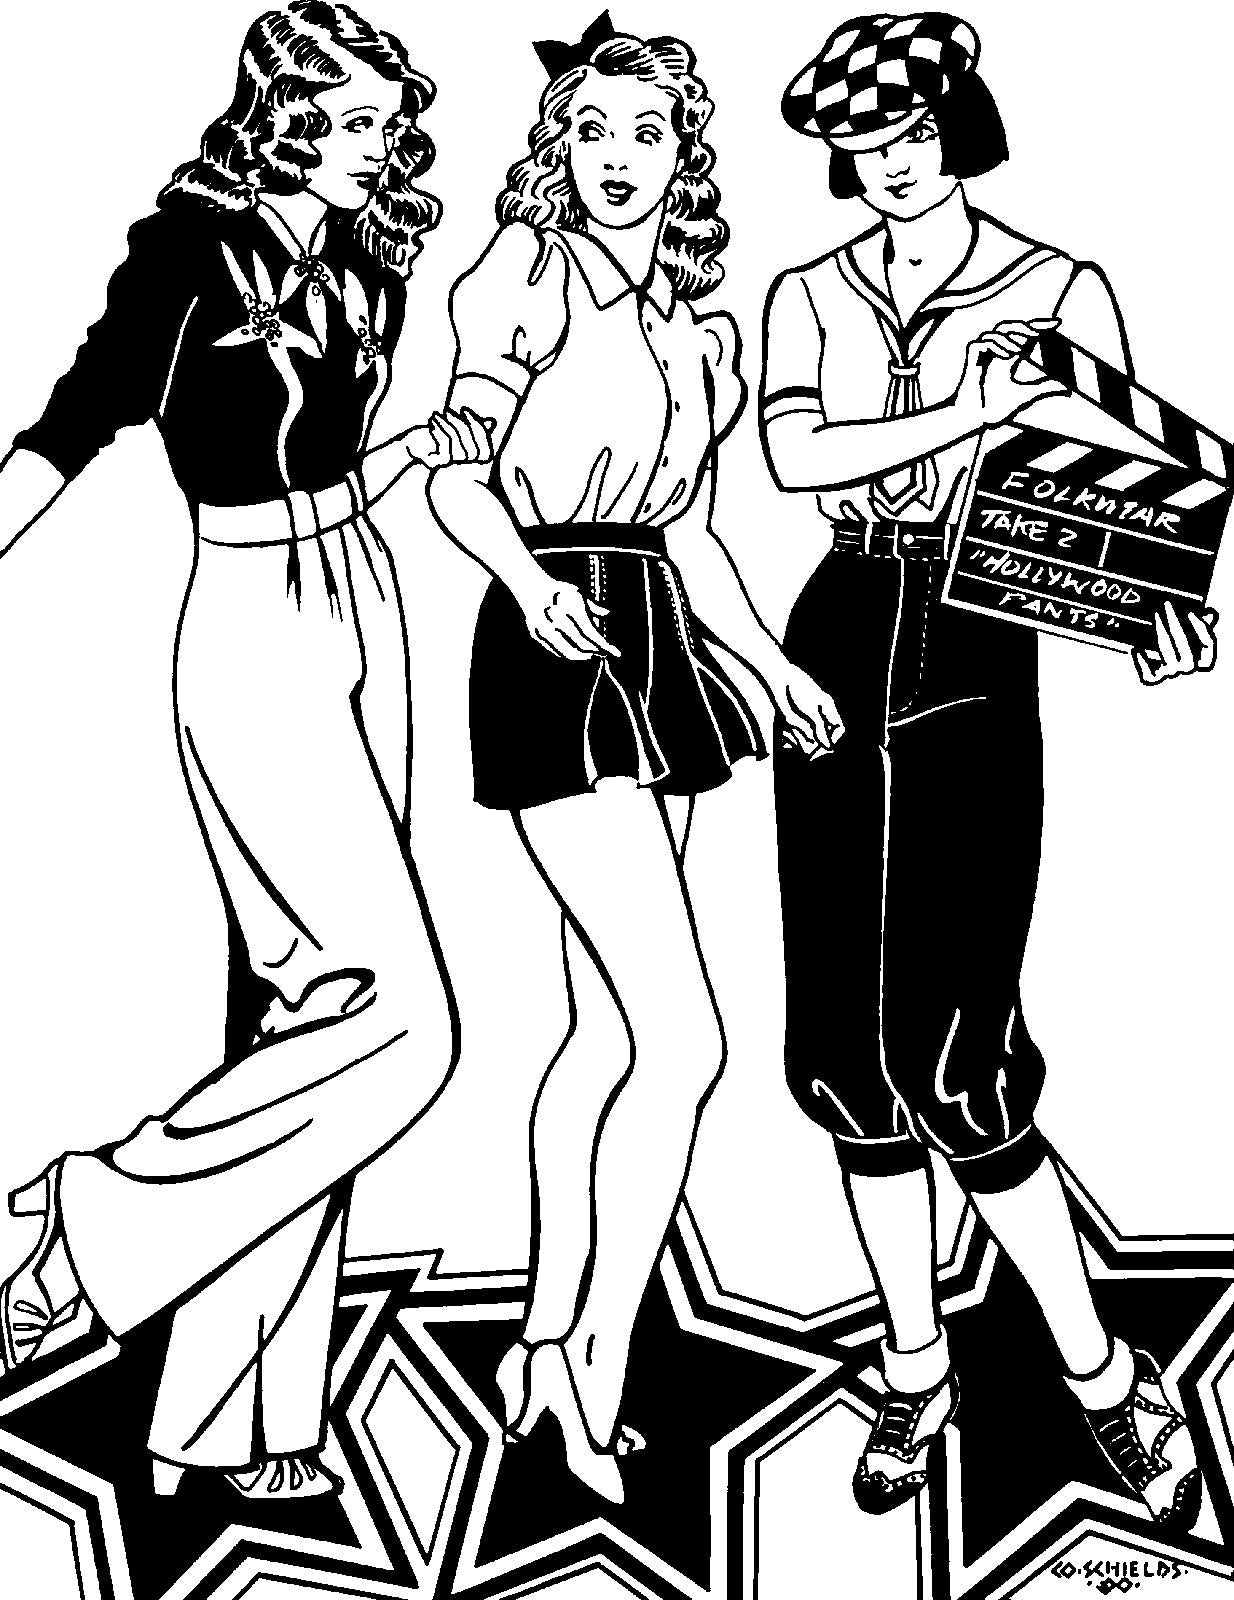 Three women, two young women and an older woman wearing the 250 Hollywood pants, one wearing knickers, trousers and shorts